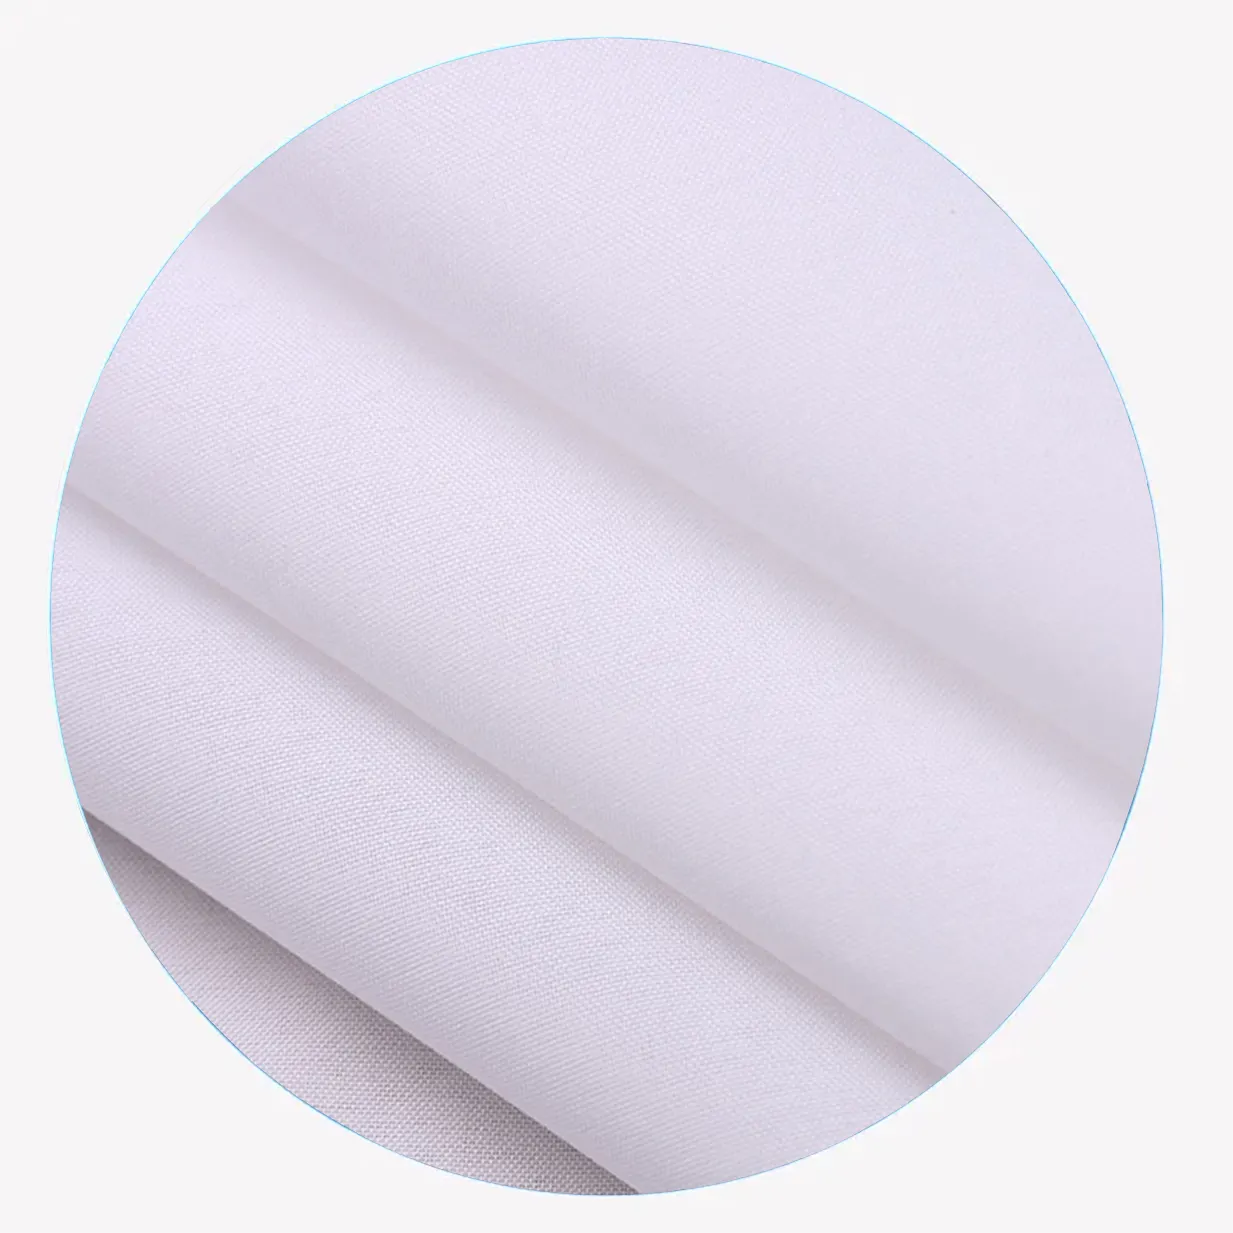 240T polyester plain patterned pocket fabric for wedding dress